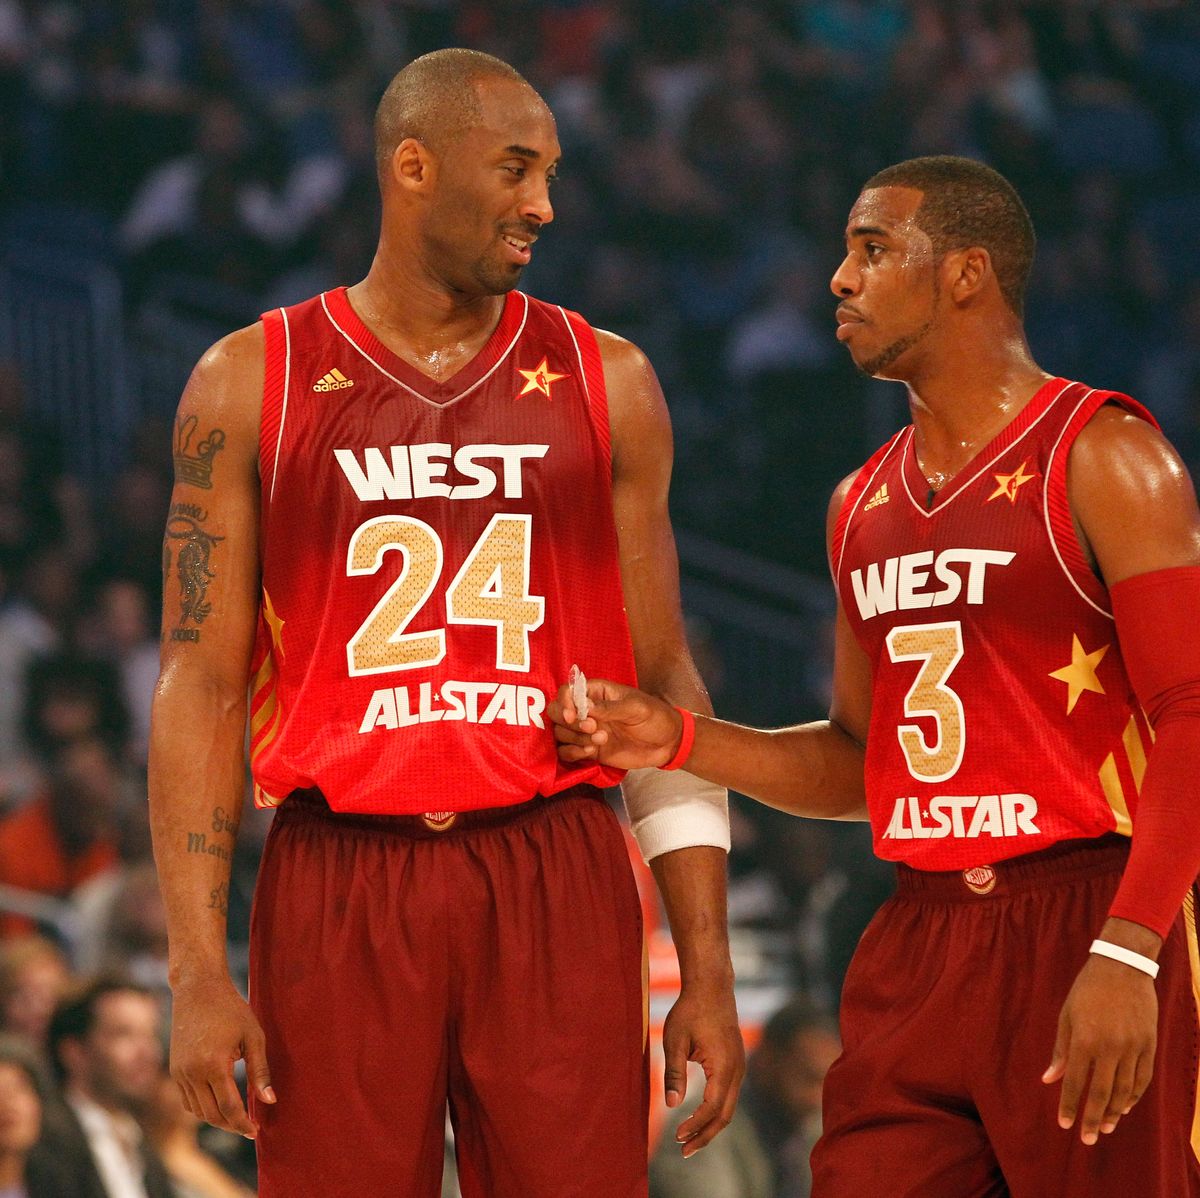 Nothing like it': Paul reflects on being part of Team USA with Kobe Bryant